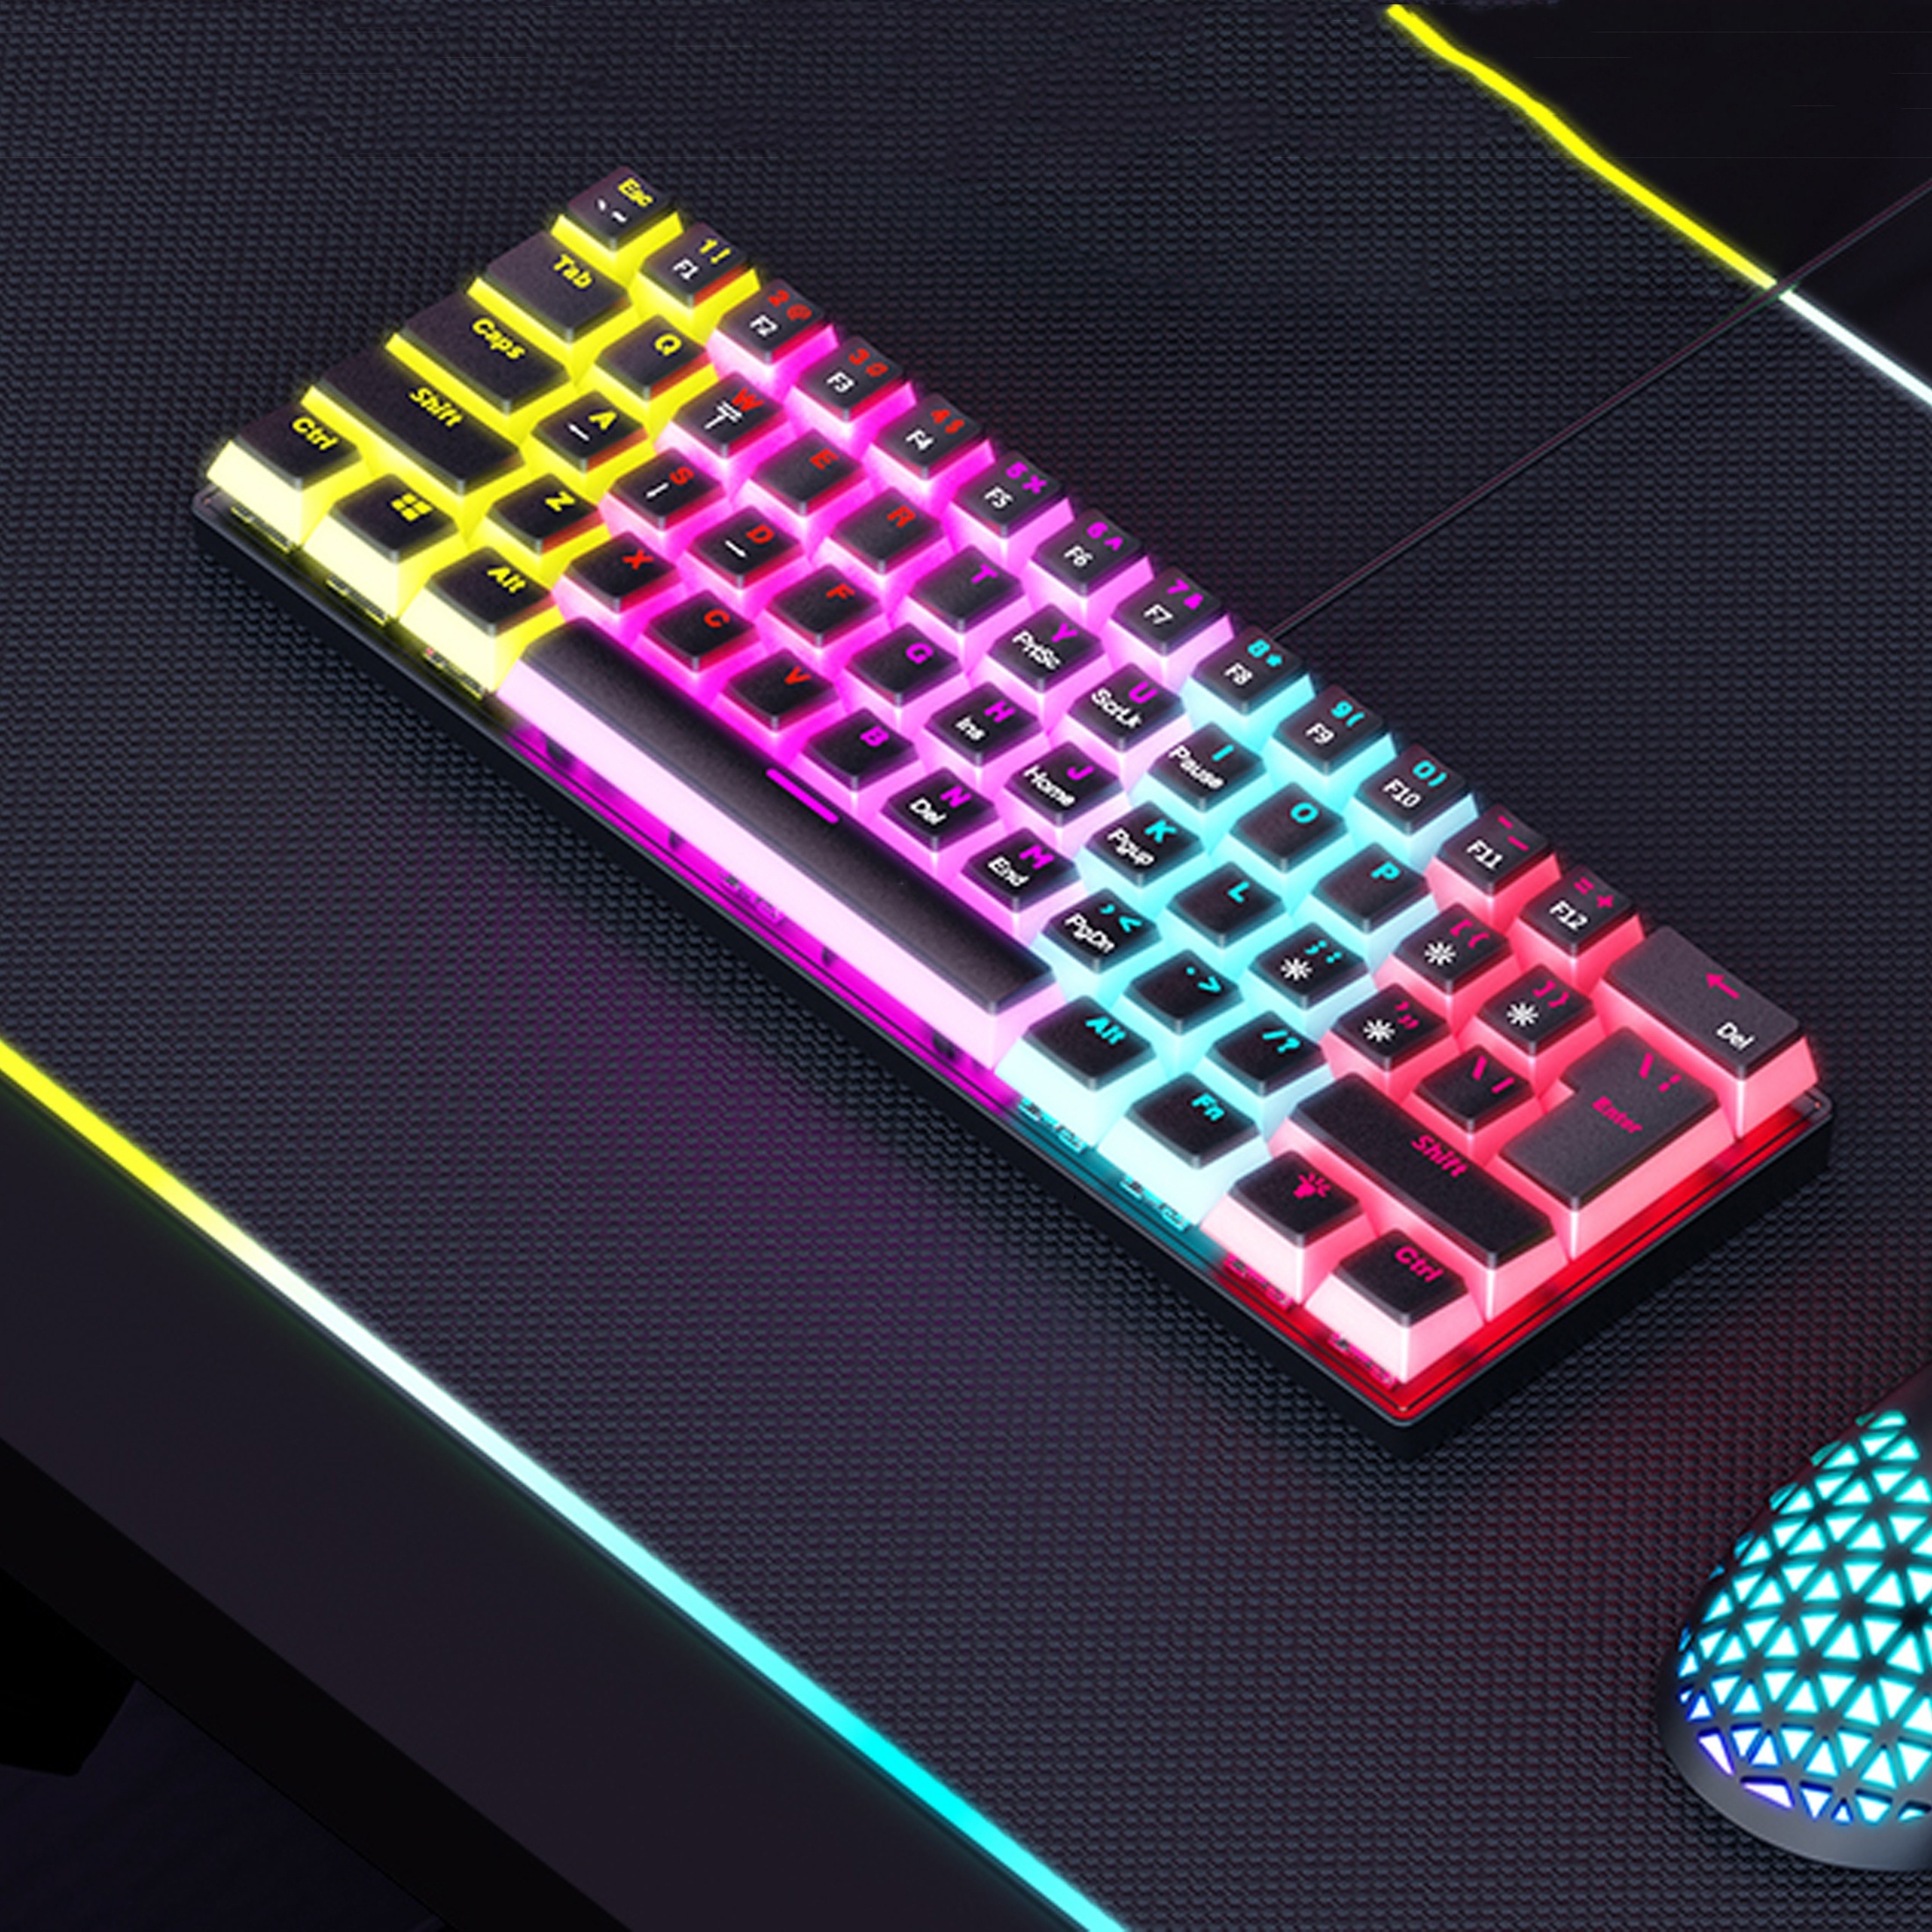 

New 61-key Wired Mechanical Keyboard, Rgb Backlit Pudding Keycaps, Blue Shaft, Multiple Lighting Modes, Usb Plug And Play Ideal For Home Games And The Office